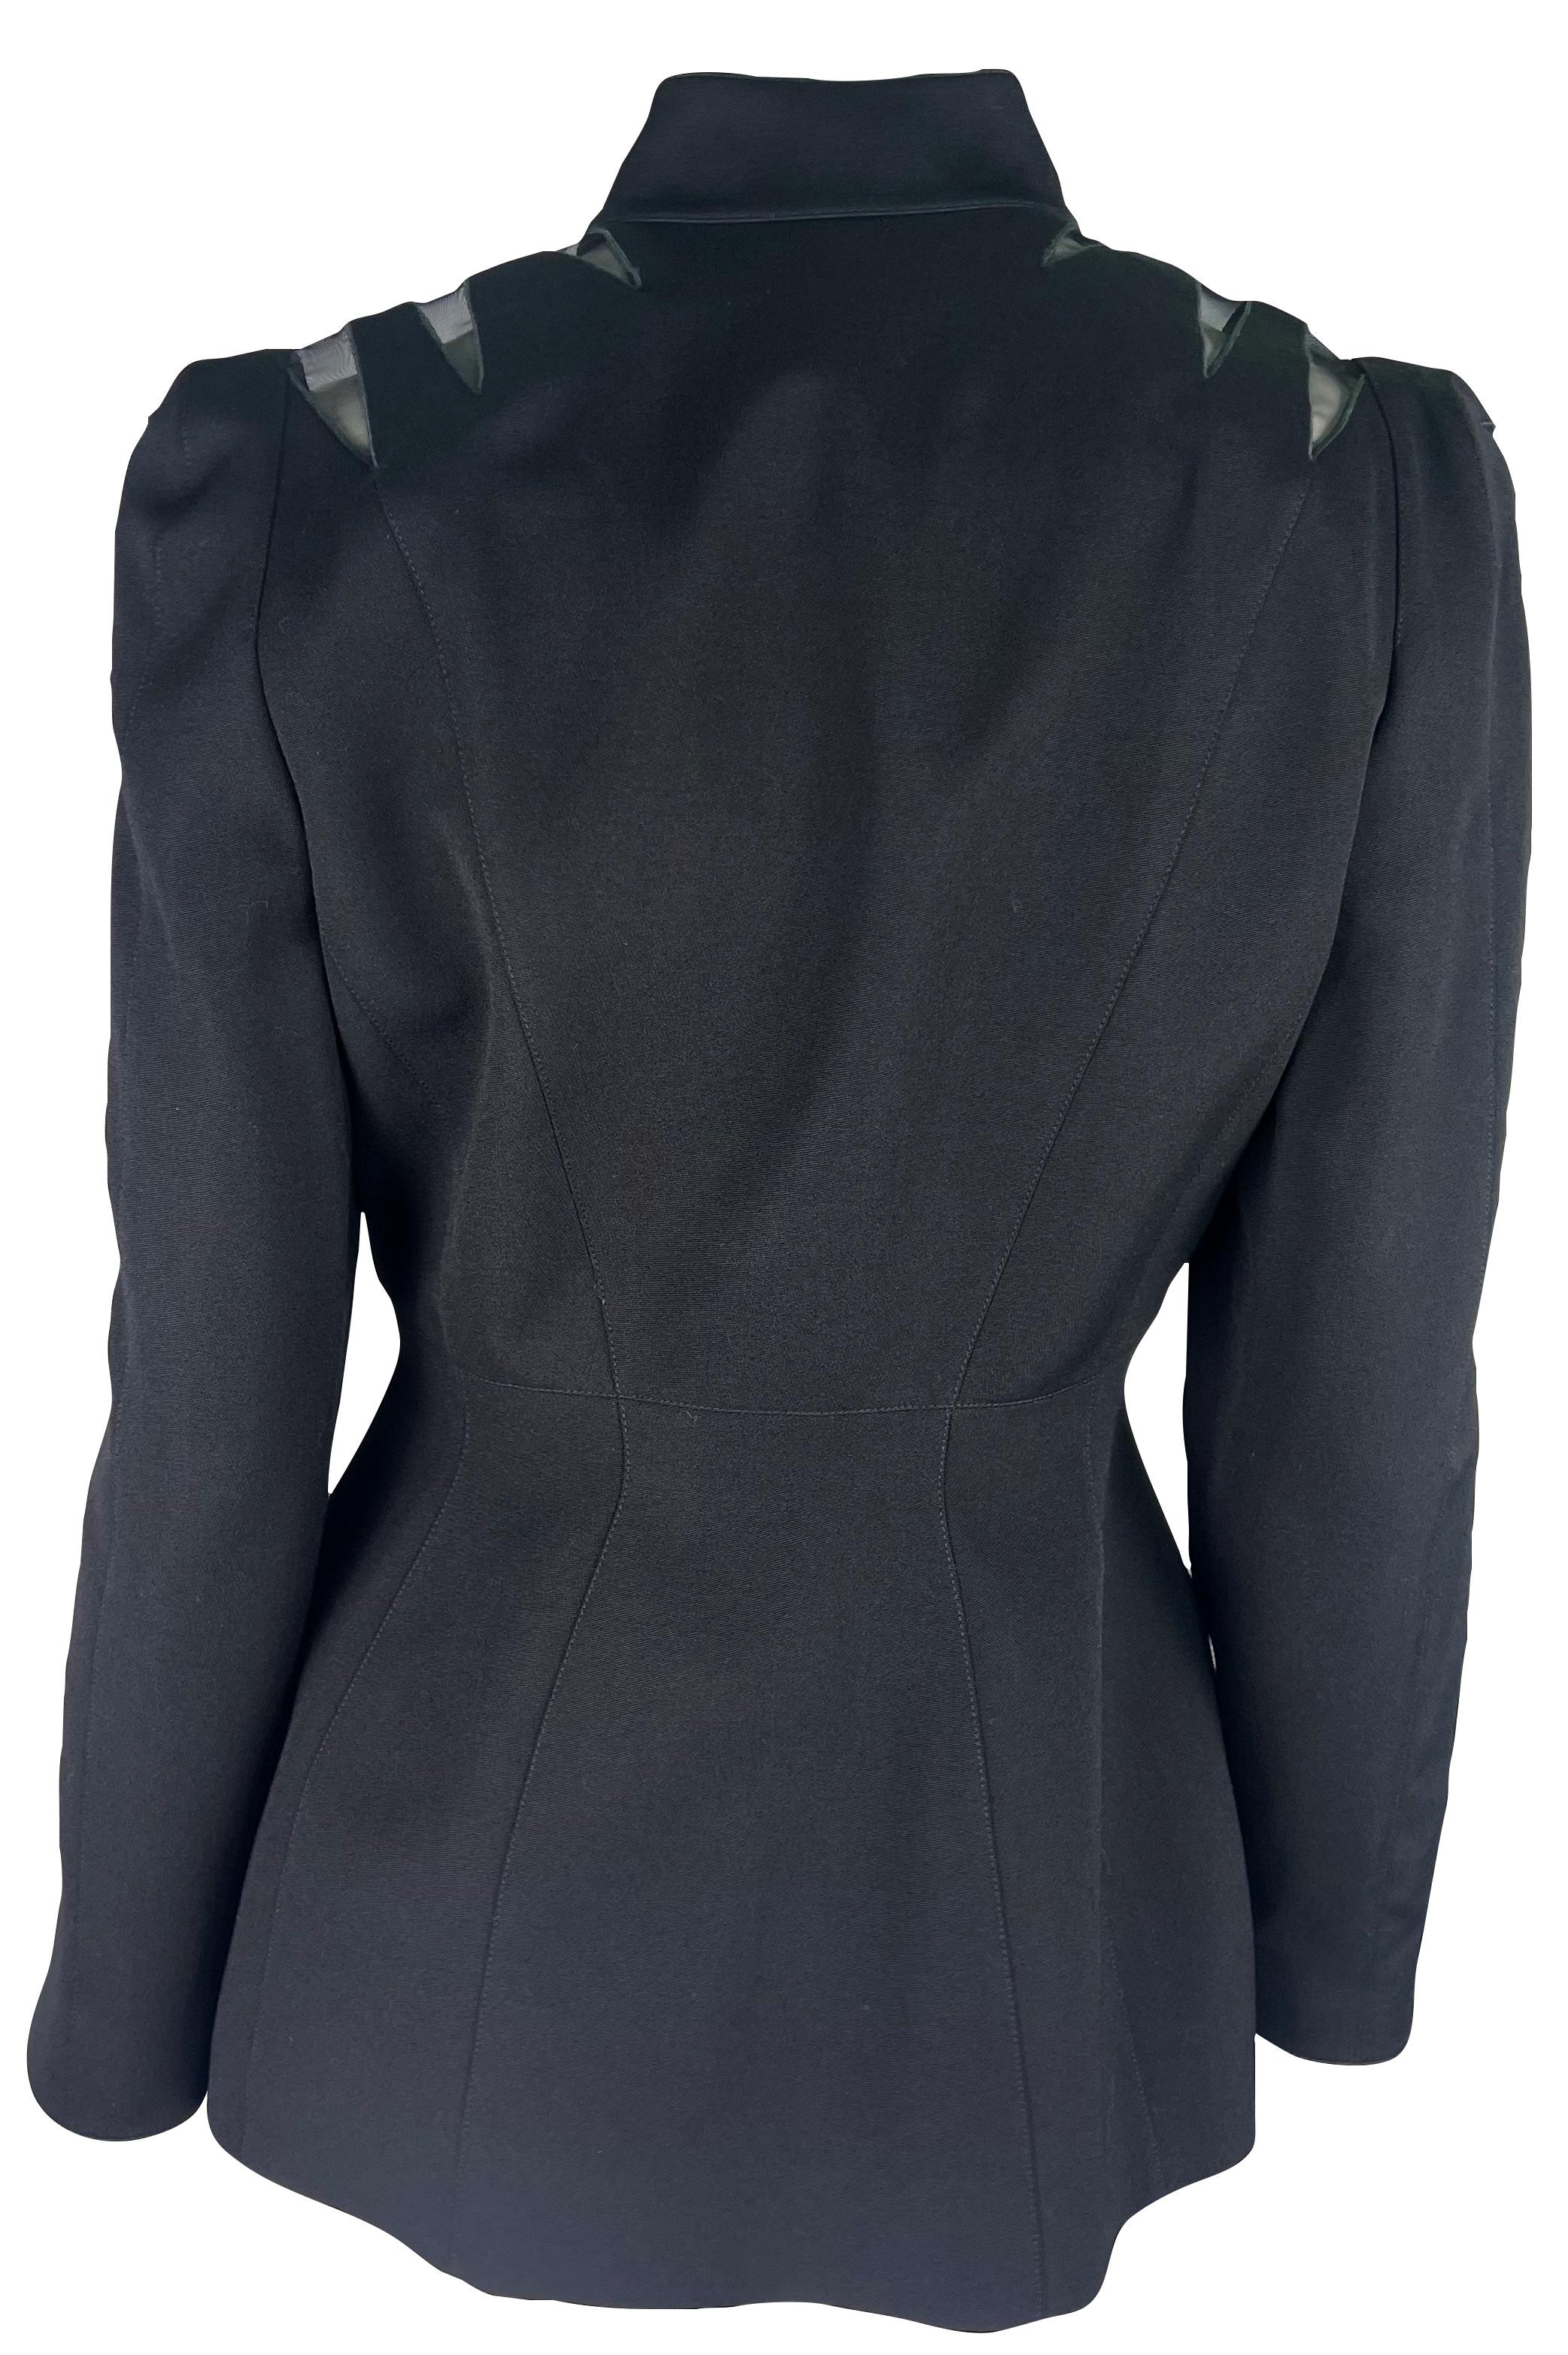 S/S 1998 Thierry Mugler Couture Runway Black Sheer Accent Blazer For Sale 2